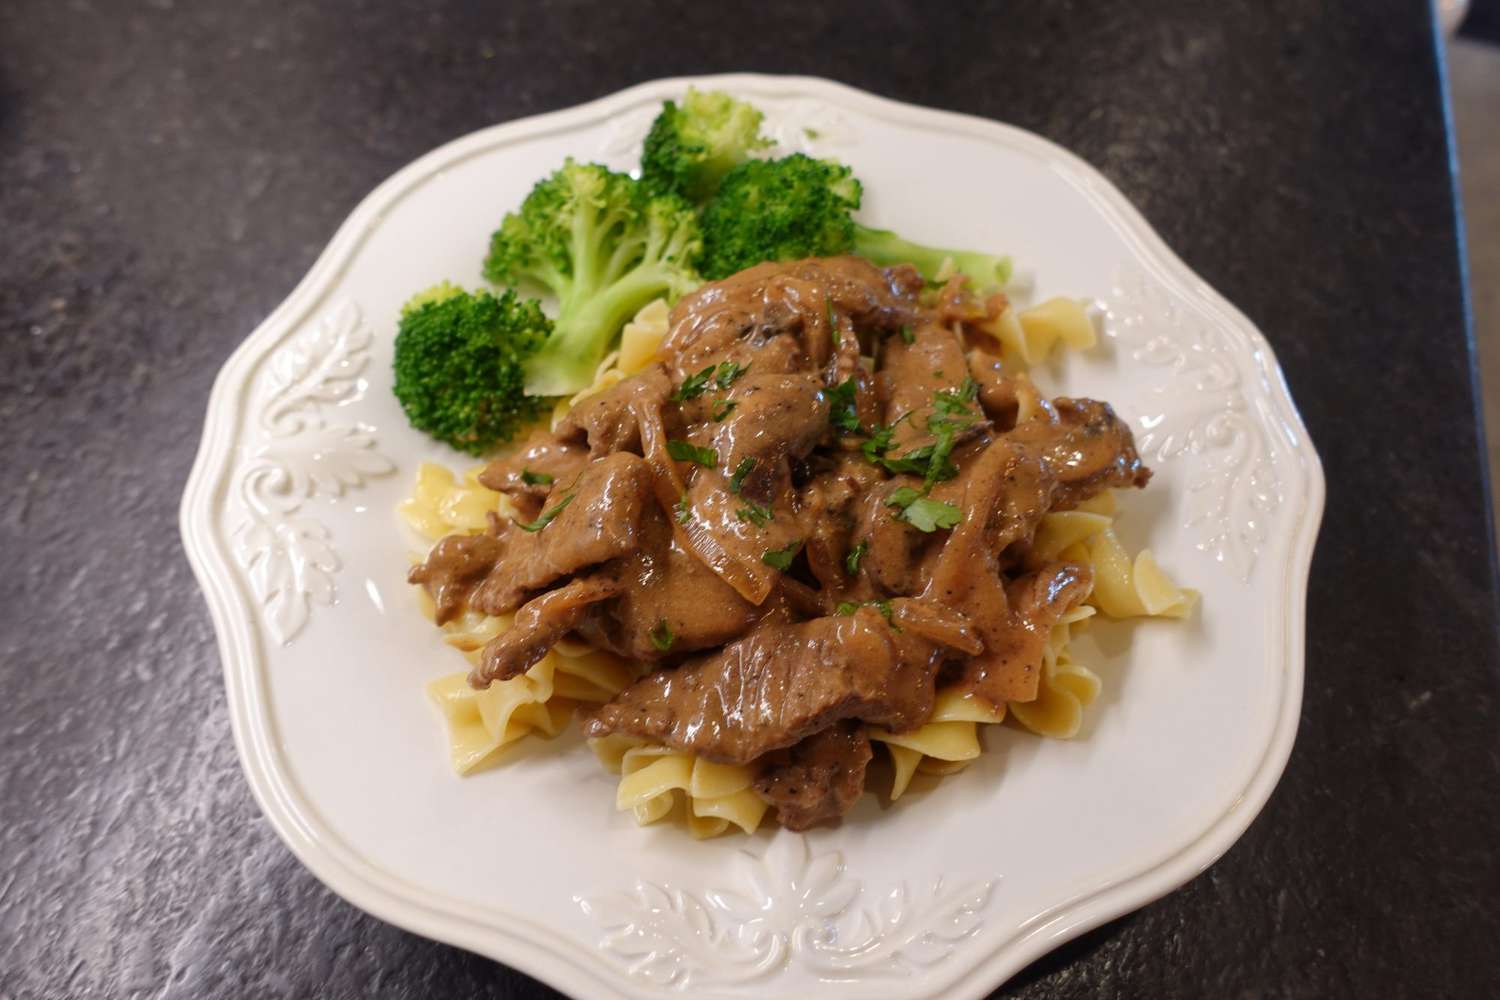 beef stroganoff over egg noodles with a side of broccoli on a white plate